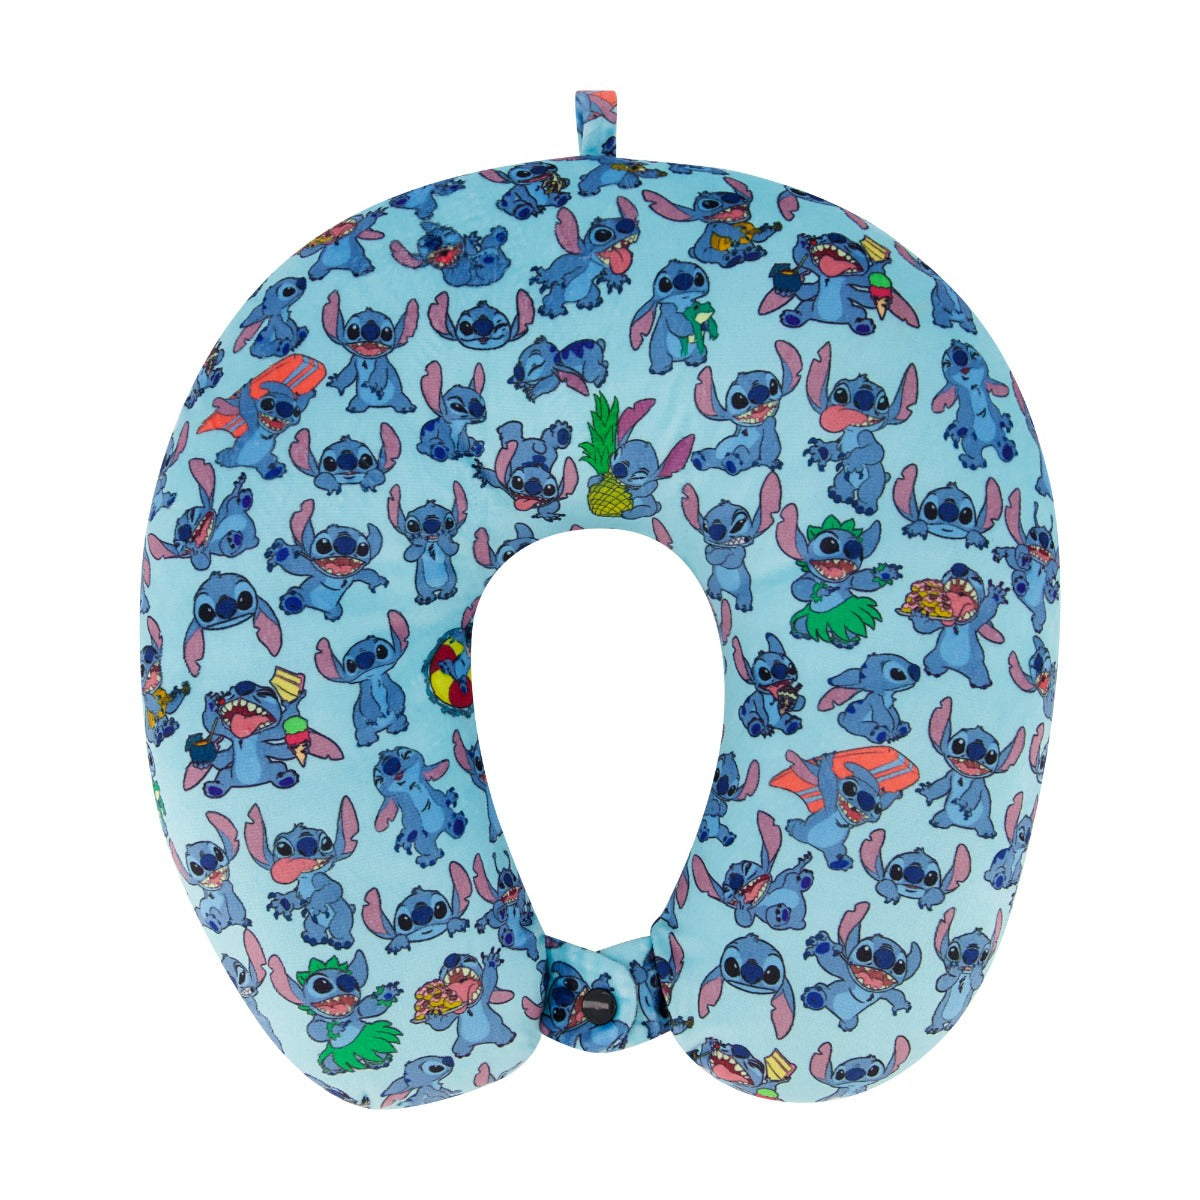 Stitch kids neck pillow with button closure in light blue - best comfortable supportive travel neck pillows